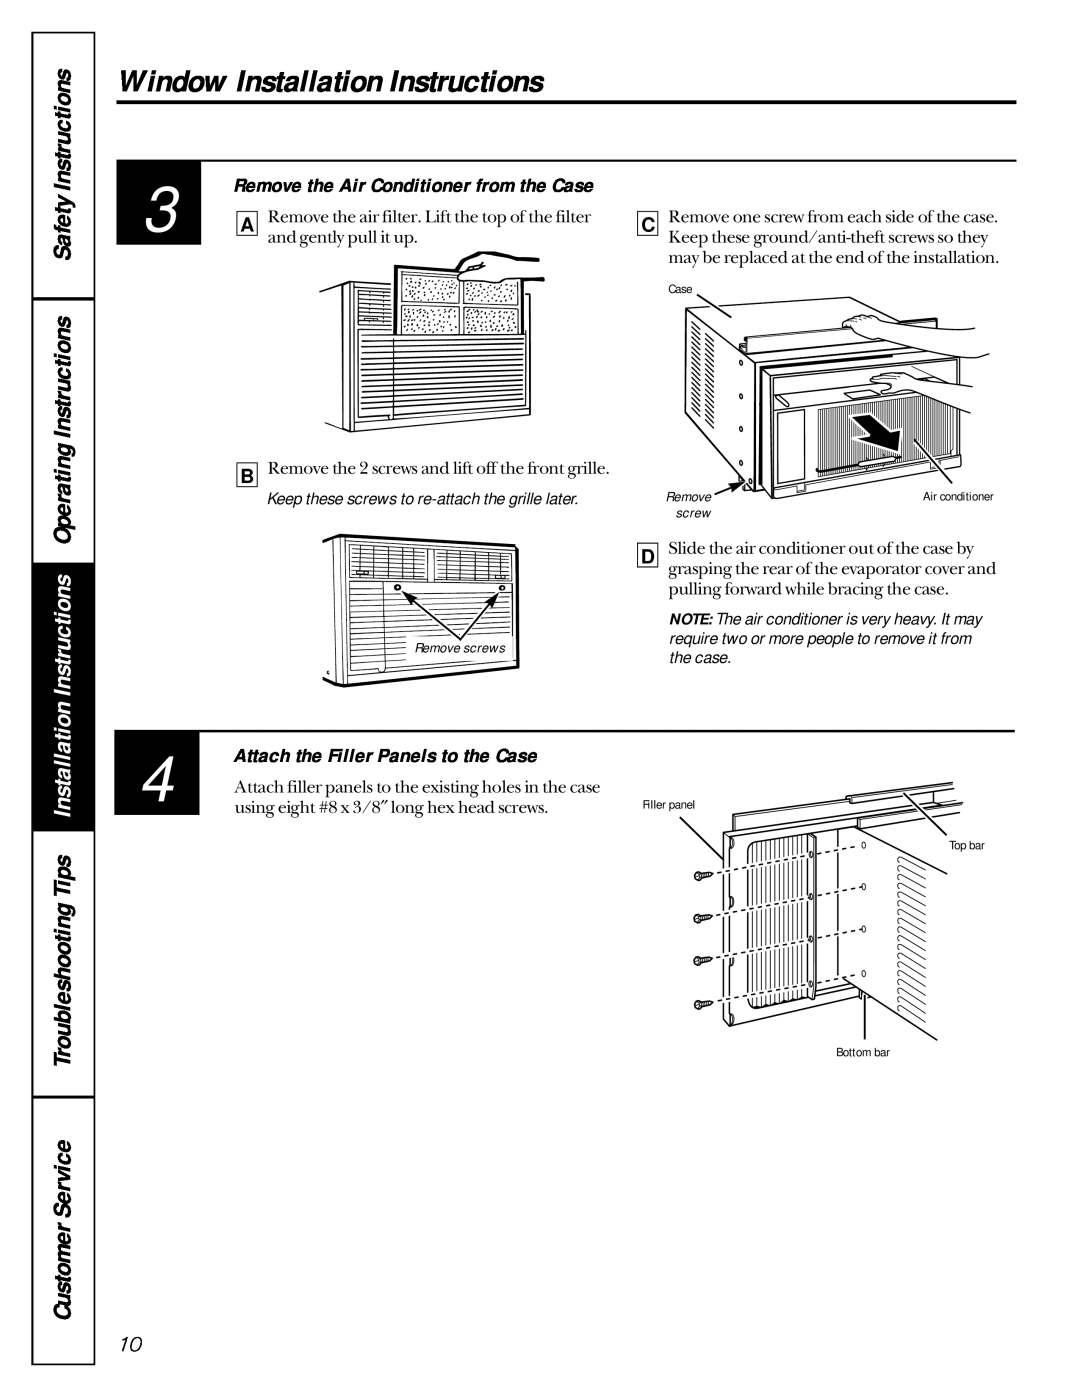 GE AVM18, AVP24, AVM22, AVN24 Window Installation Instructions, CustomerService, Remove the Air Conditioner from the Case 